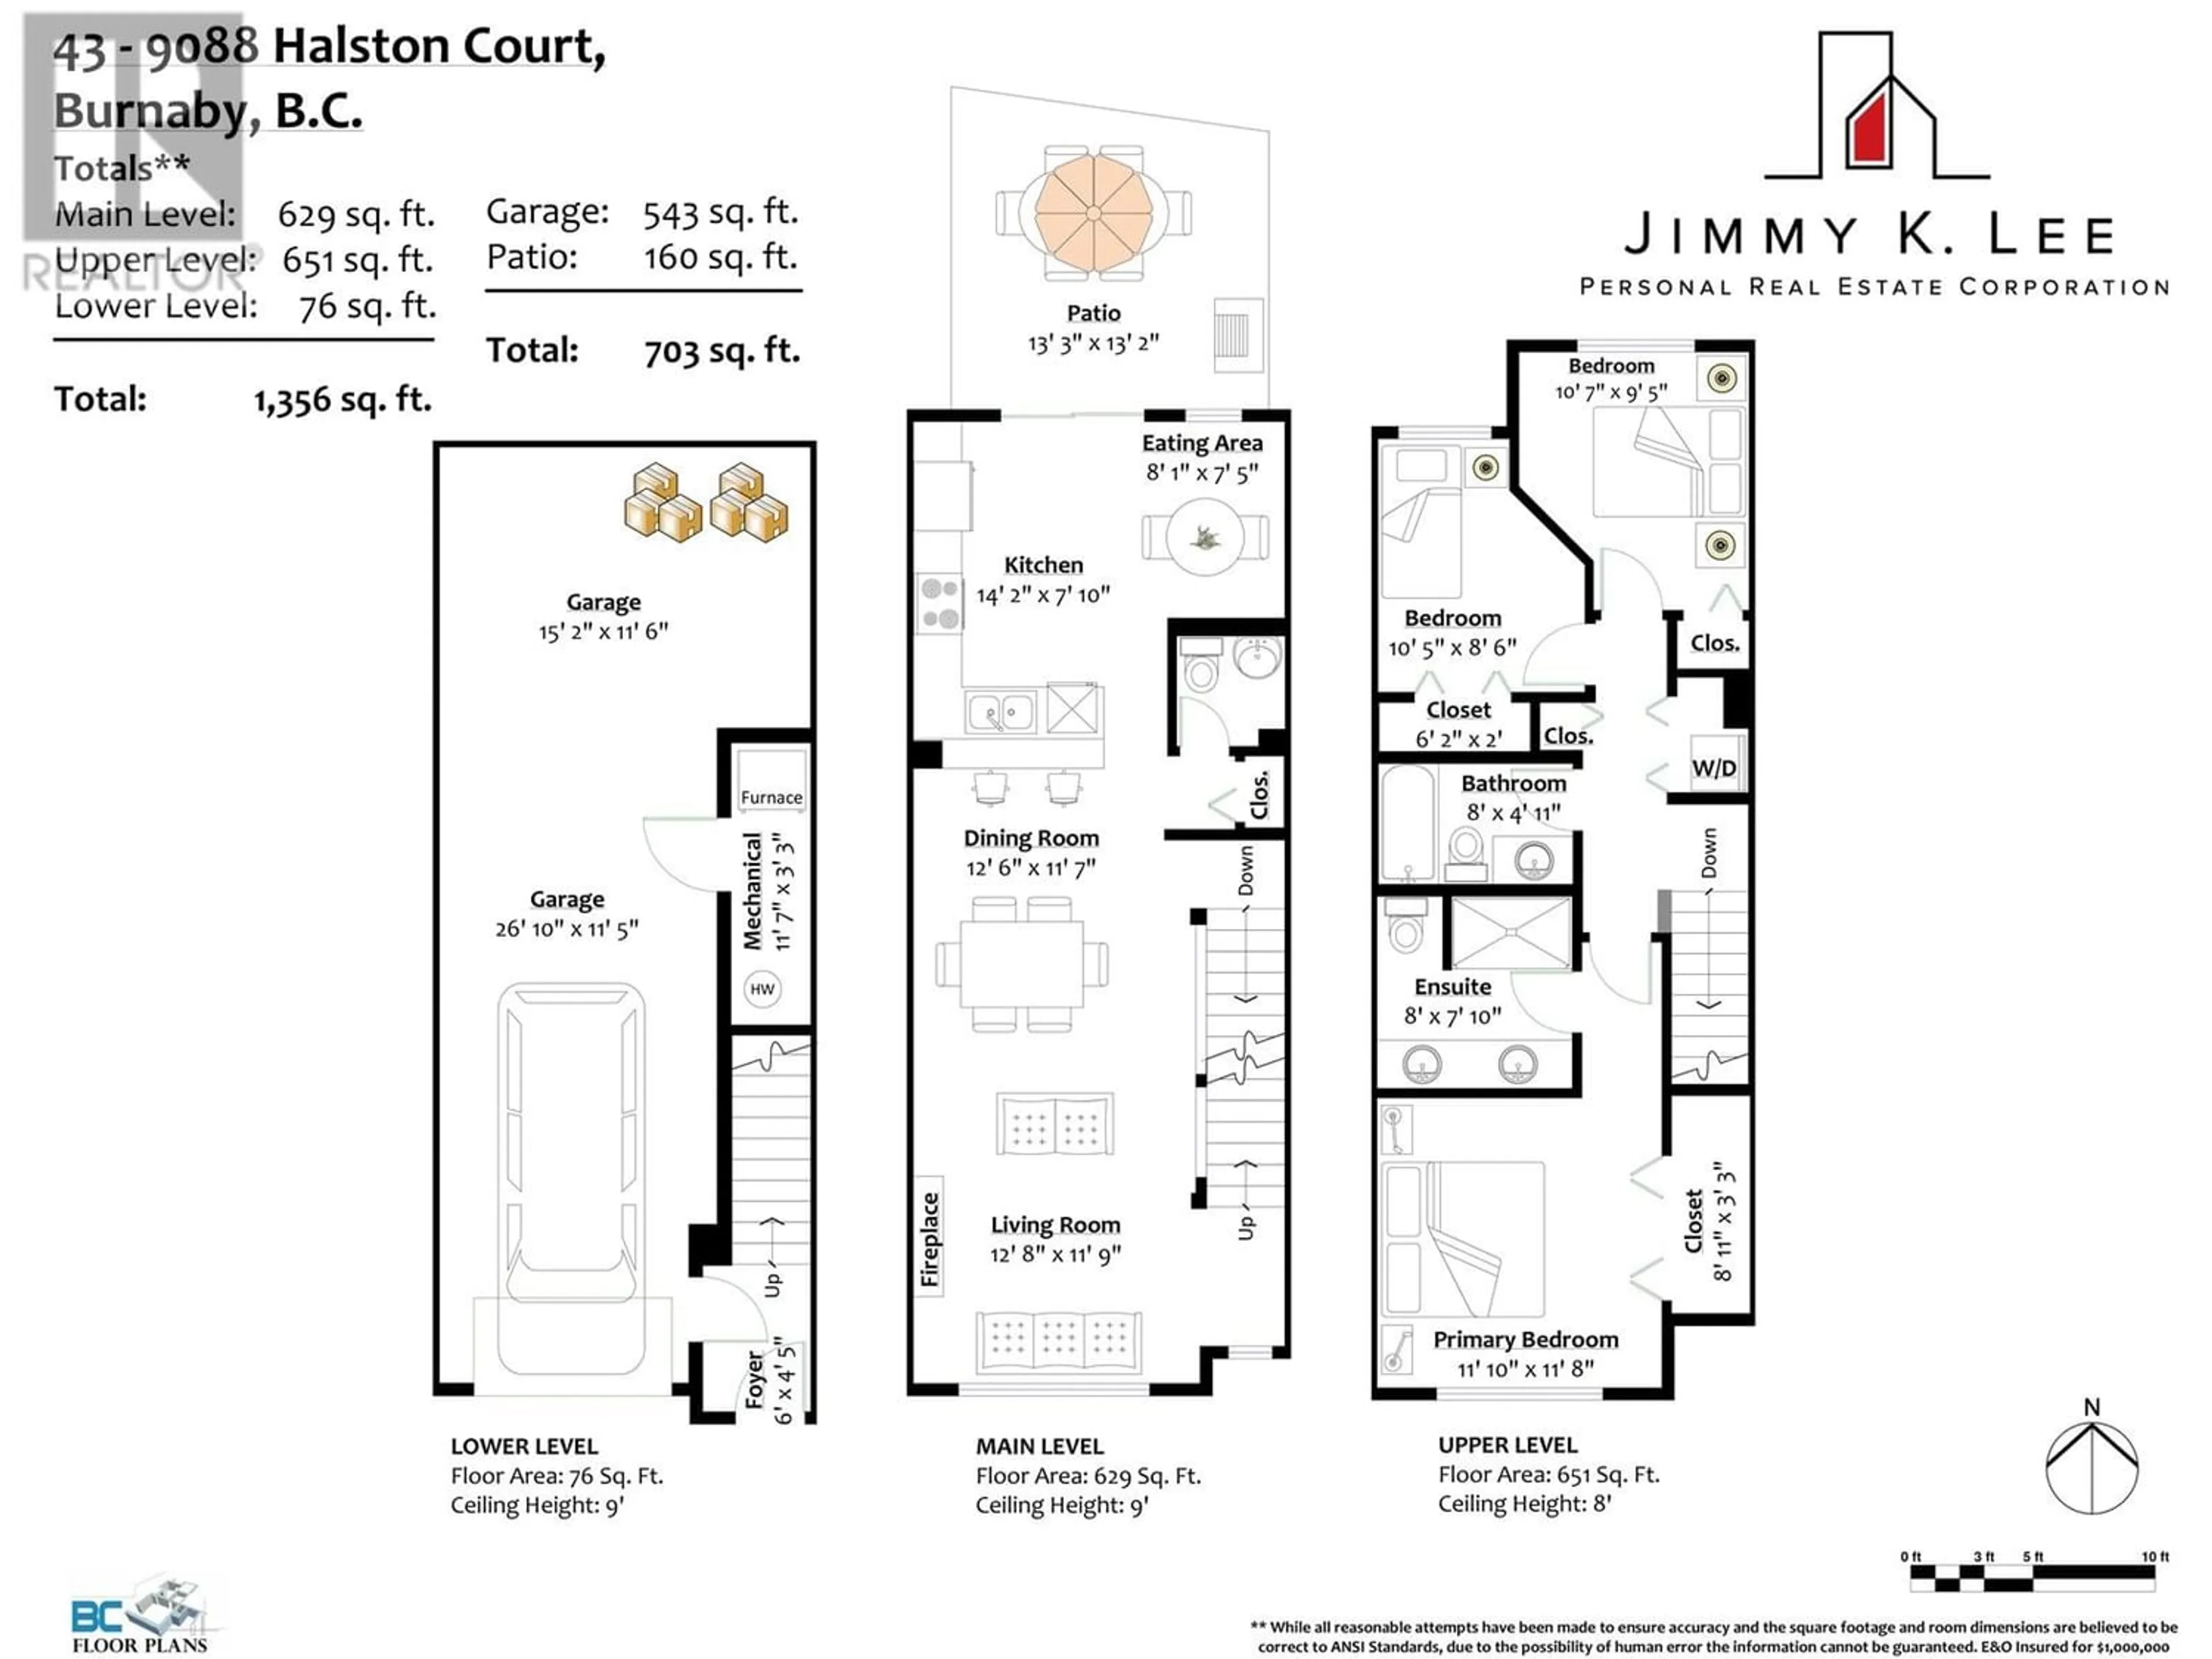 Floor plan for 43 9088 HALSTON COURT, Burnaby British Columbia V3N0A7